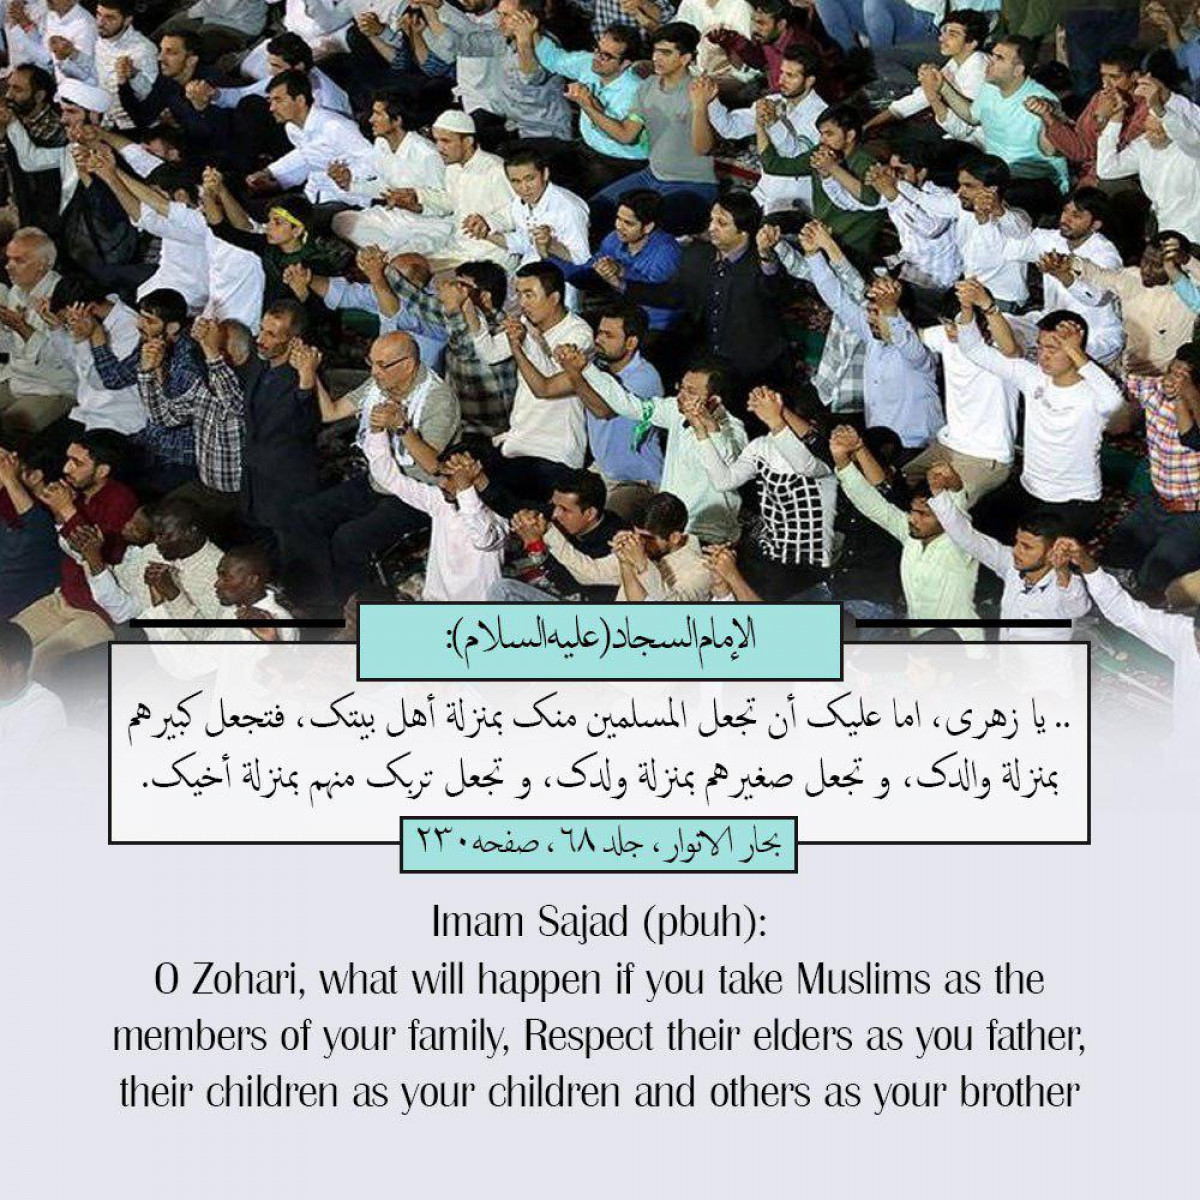 Imam Sajad (pbuh): O Zohari, what will happen if you take Muslims as the members of your family